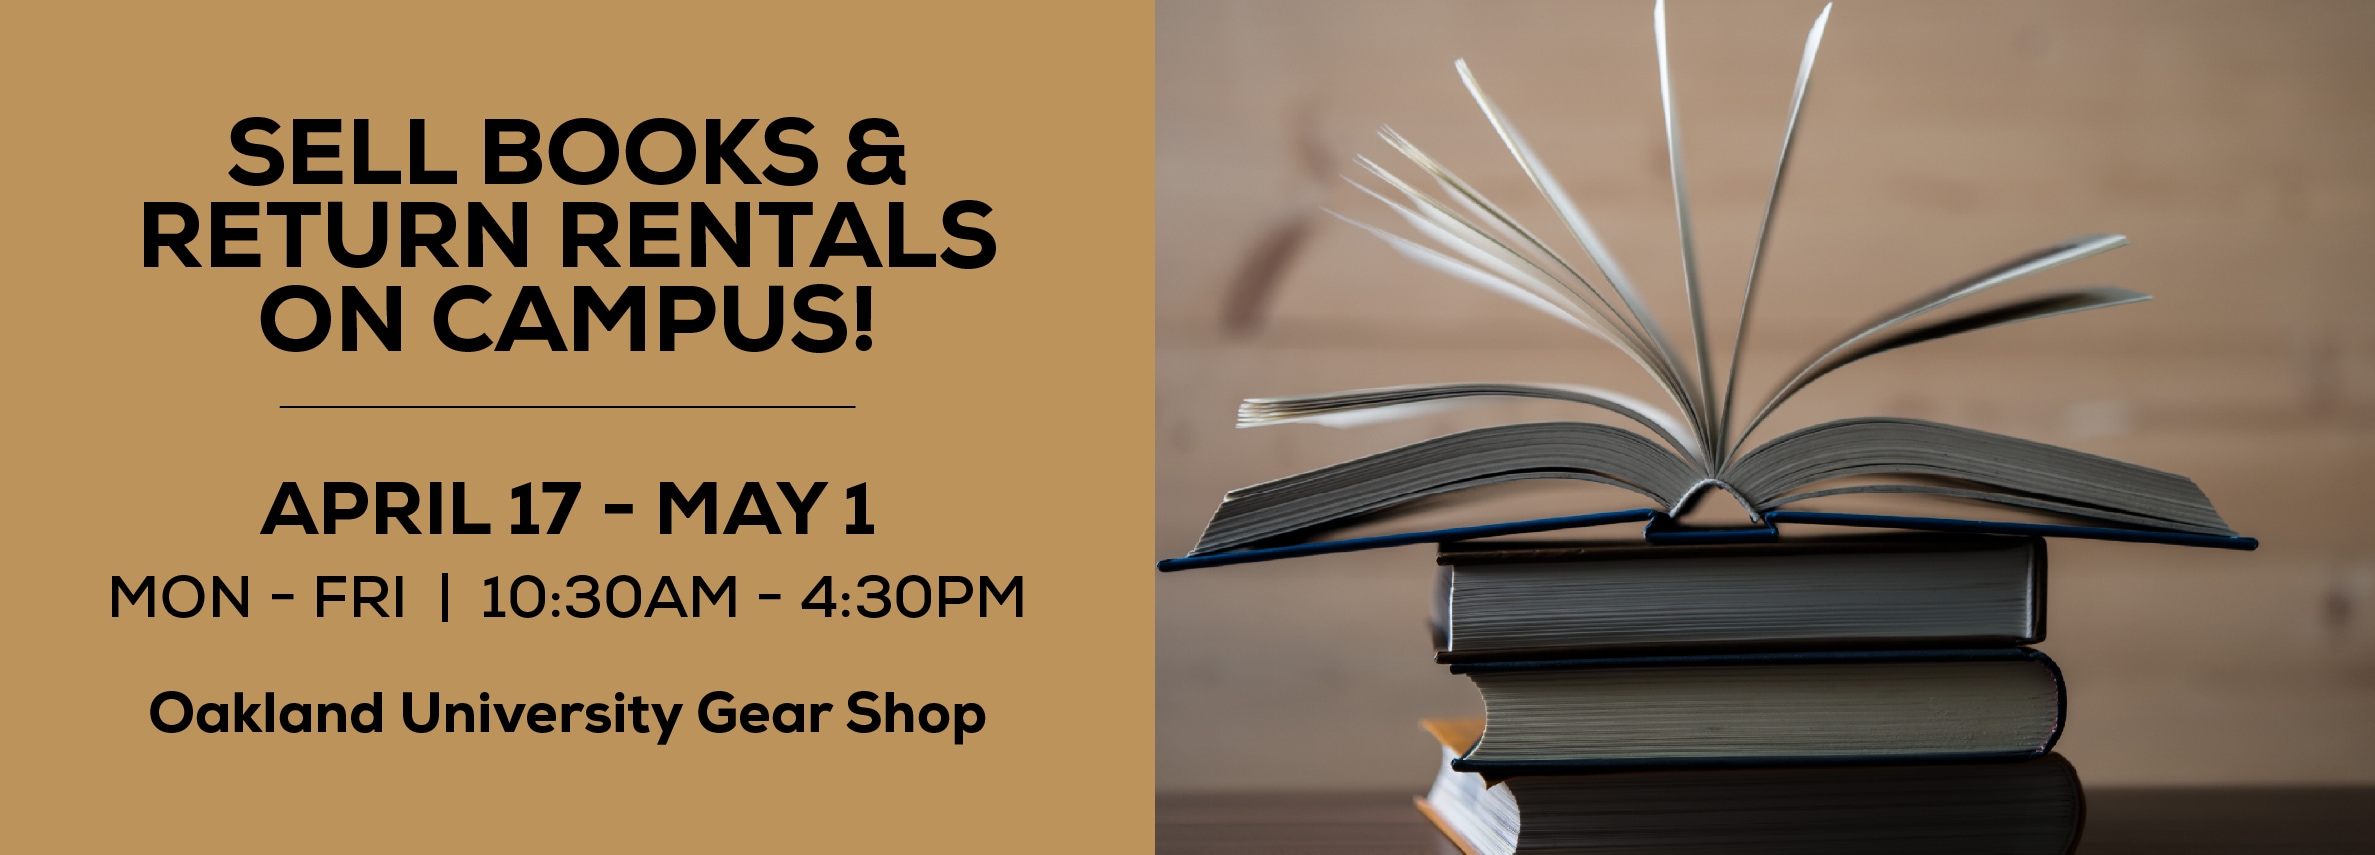 Sell books and return rentals on campus! April 17 - May 1. Monday through Friday | 10:30am to 4:30pm. Oakland University Gear Shop.